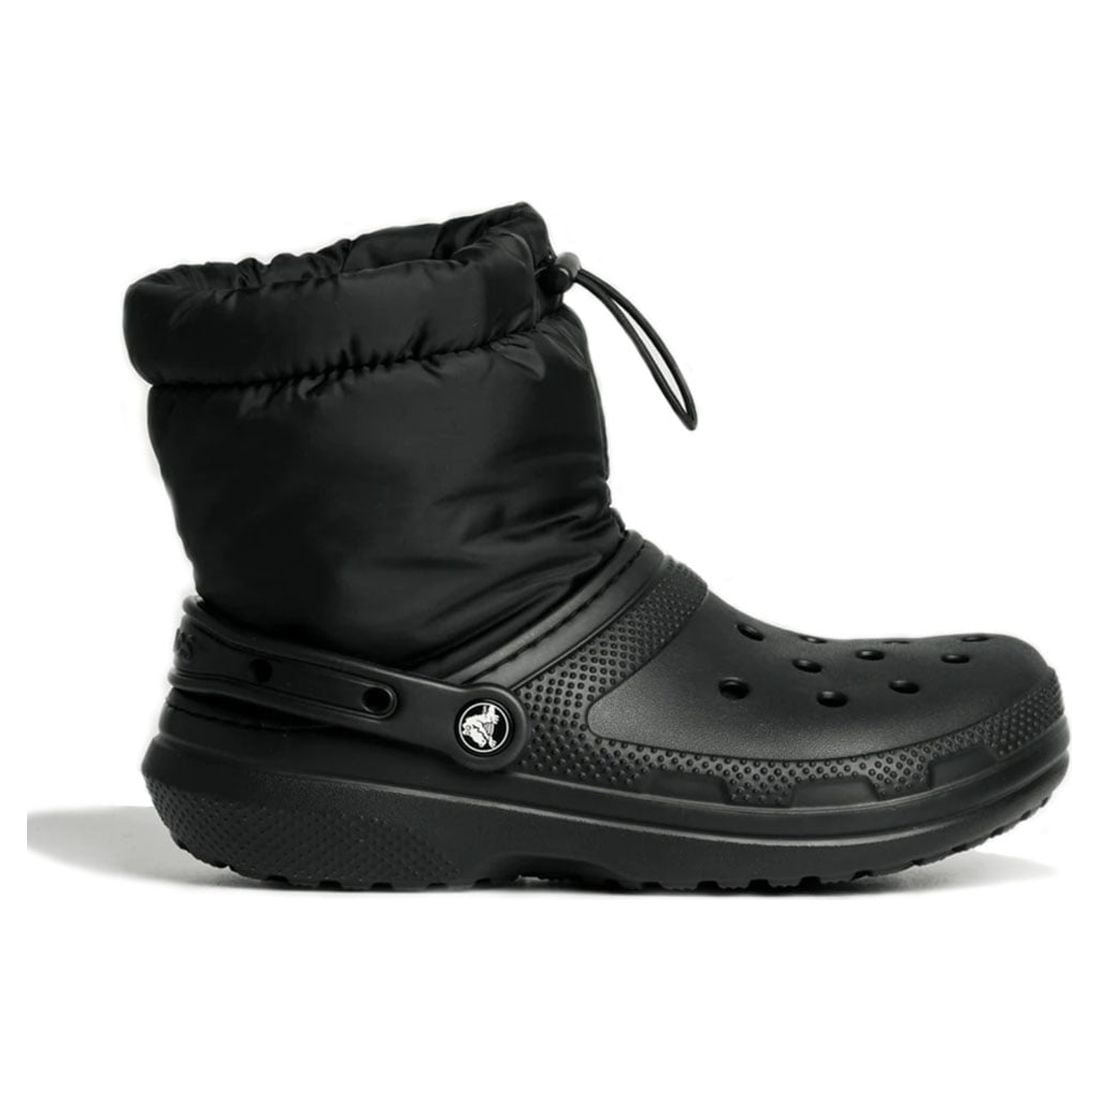 【auf Lager】 Crocs Unisex Classic Lined Boot Neo Puff